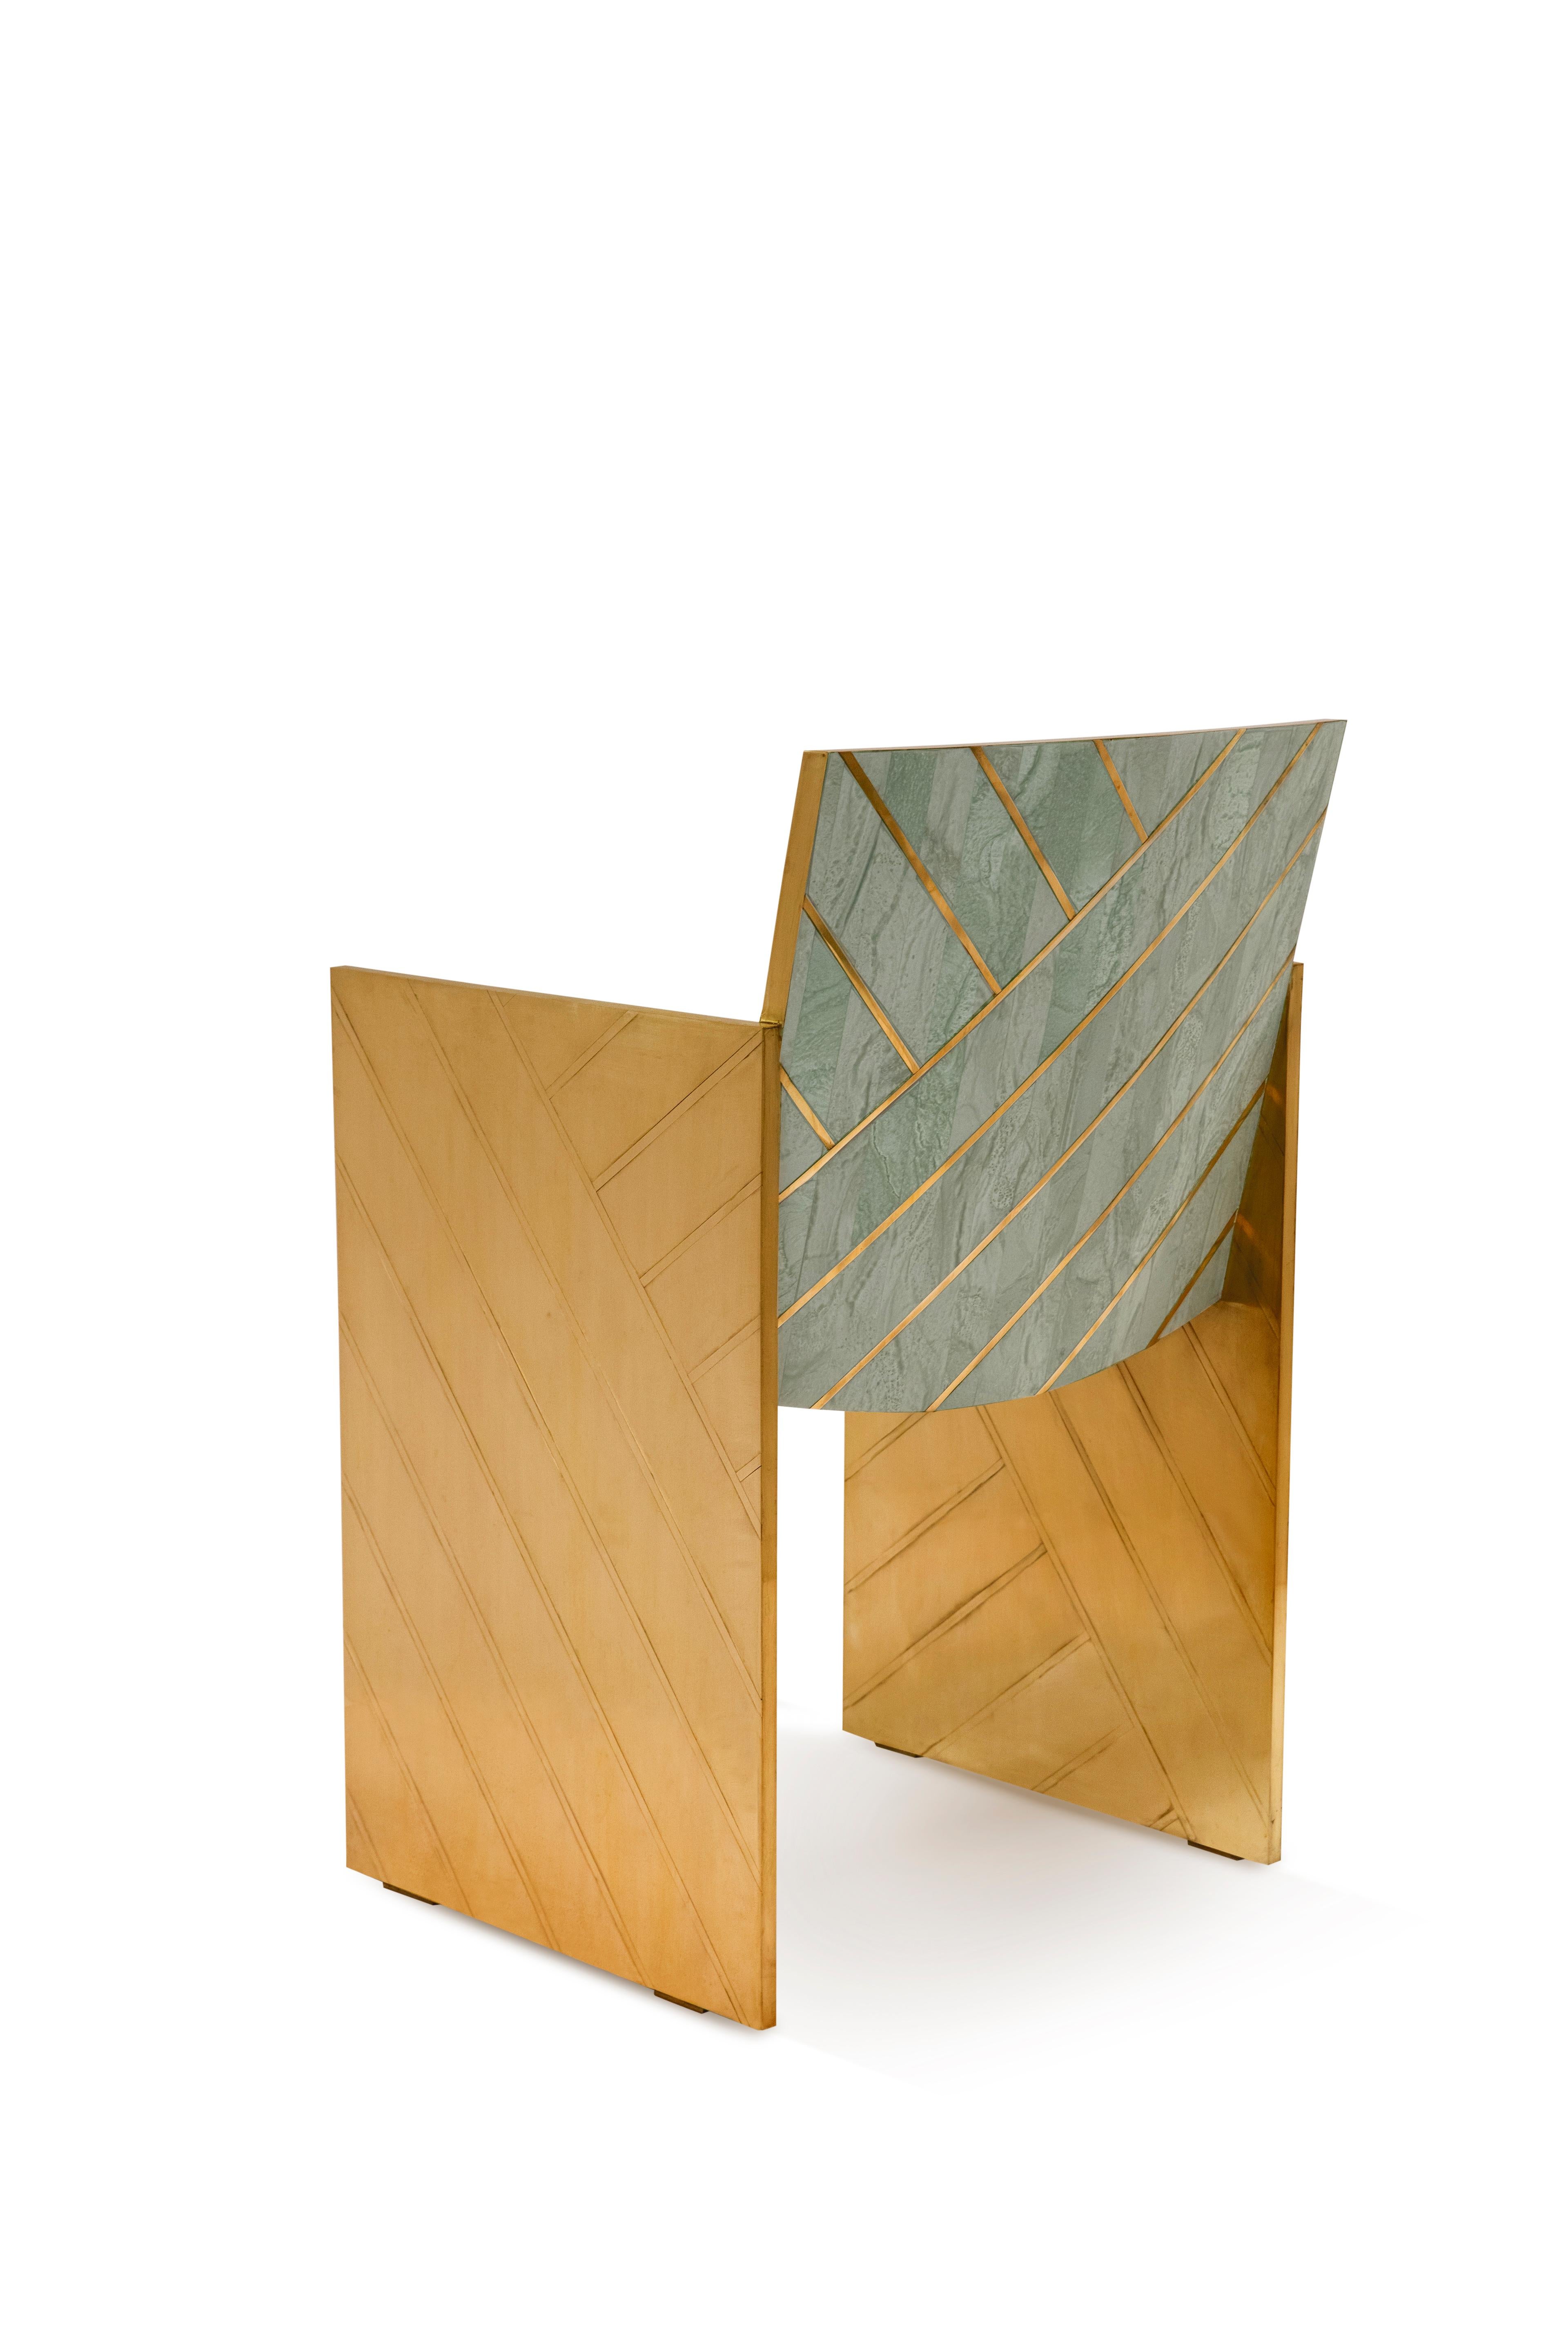 Nesso Mint Green Dining Chair  with Brass Inlay by Matteo Cibic is a beautiful chair in pearly resin with geometric brass inlay. It can be matched beautifully with the Nesso dining table. It comes in three colors, beige, gray and mint.

Awarded